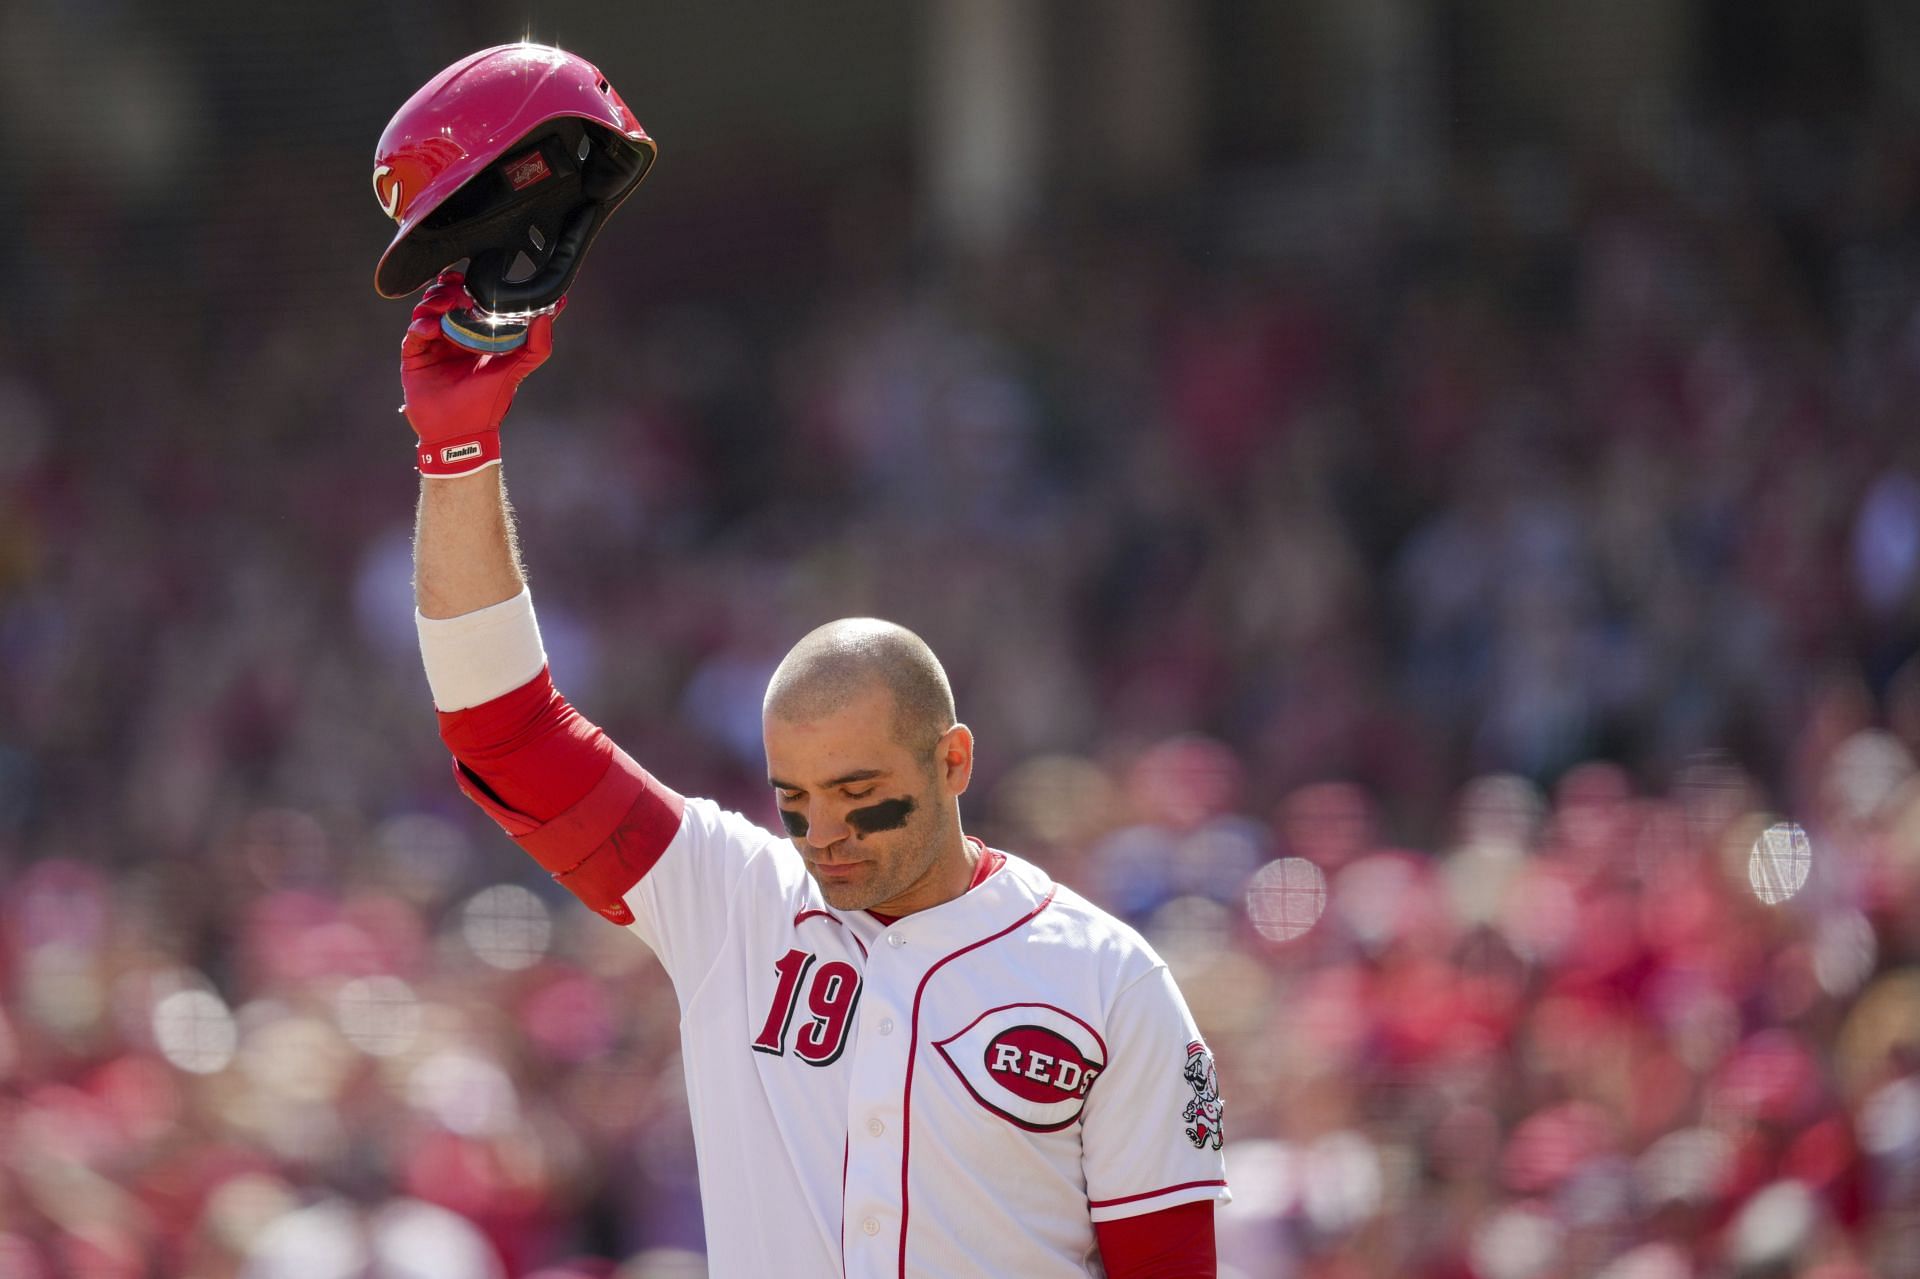 Joey Votto may not retire